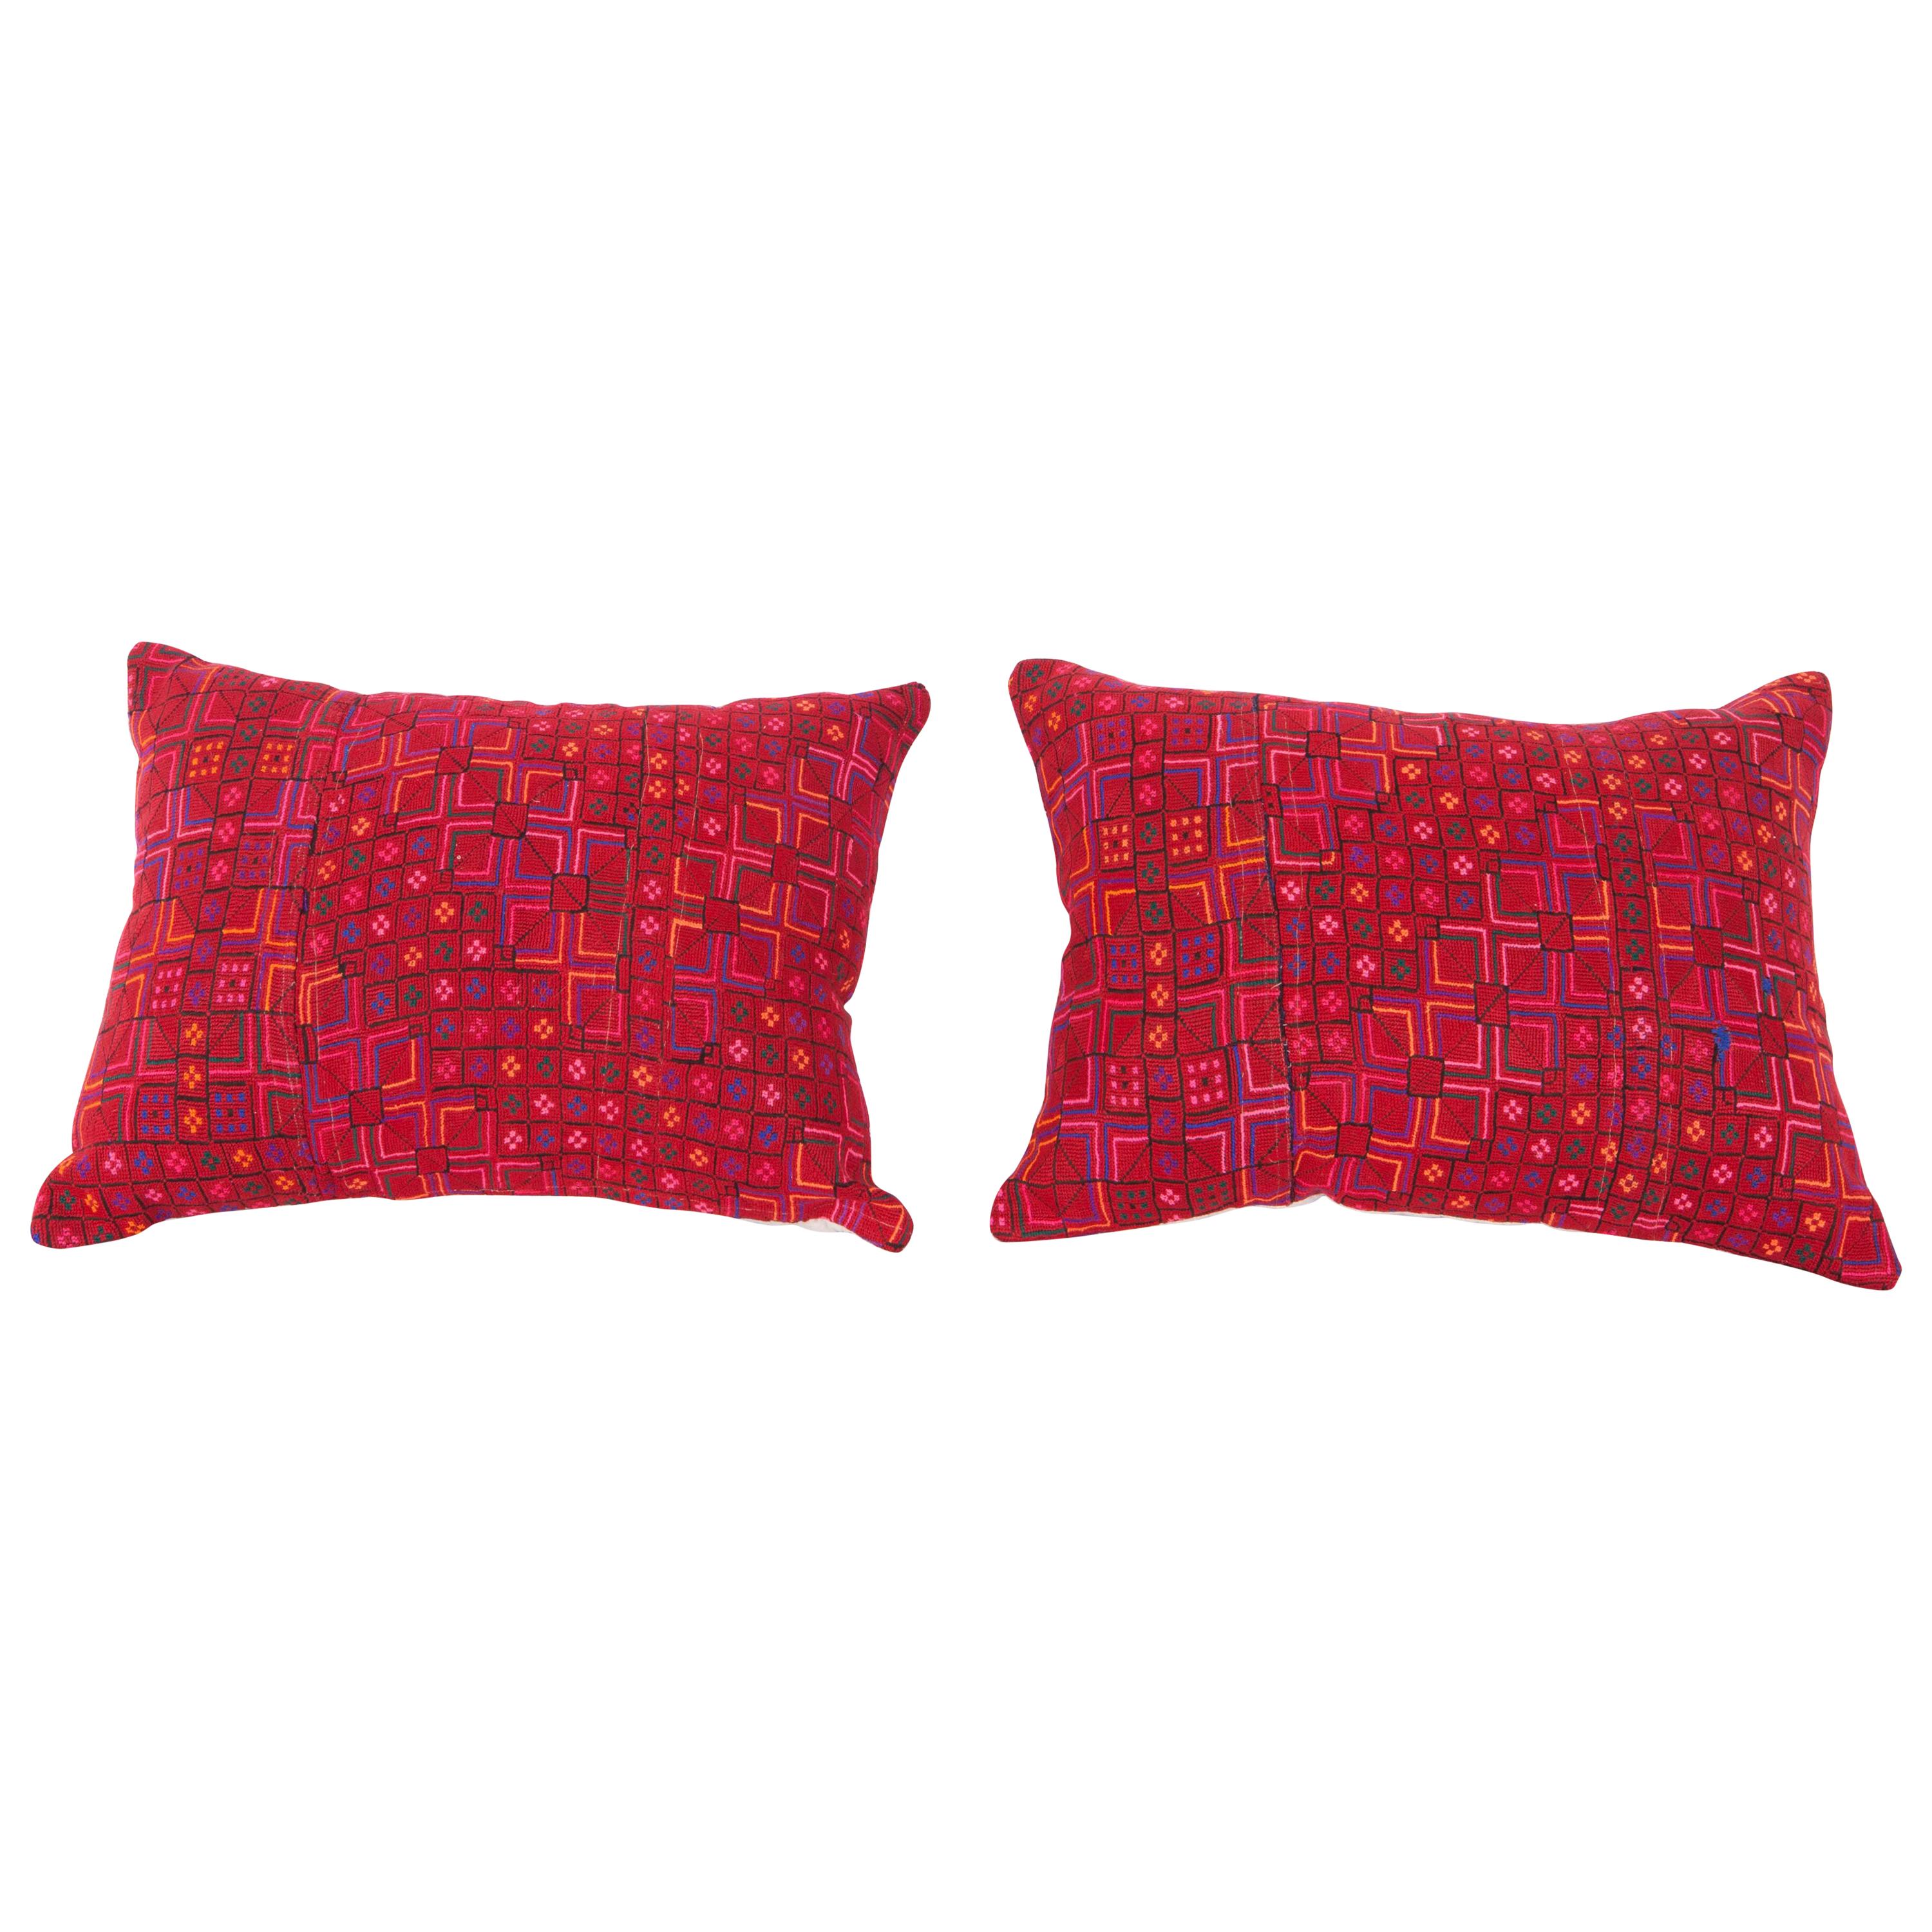 Pillow Cases or Cushions Made from a Middle Eastern Syrian Bedouin Embroidery